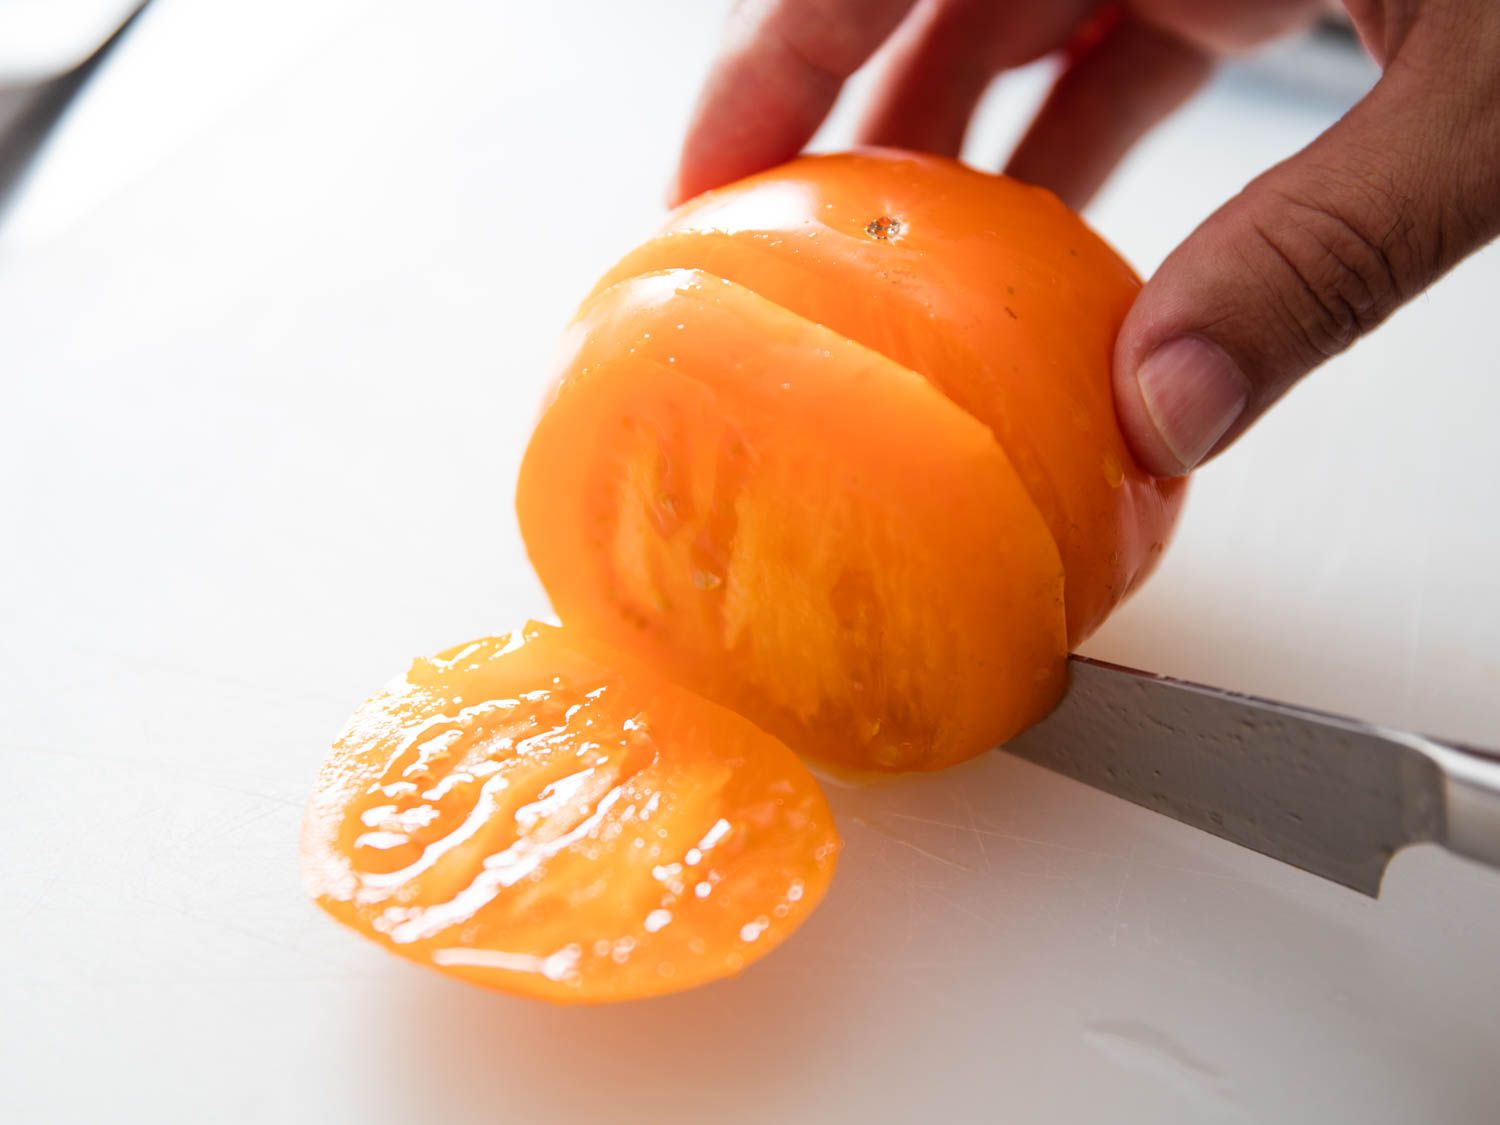 A ripe, yellow tomato variety being sliced on a cutting board.